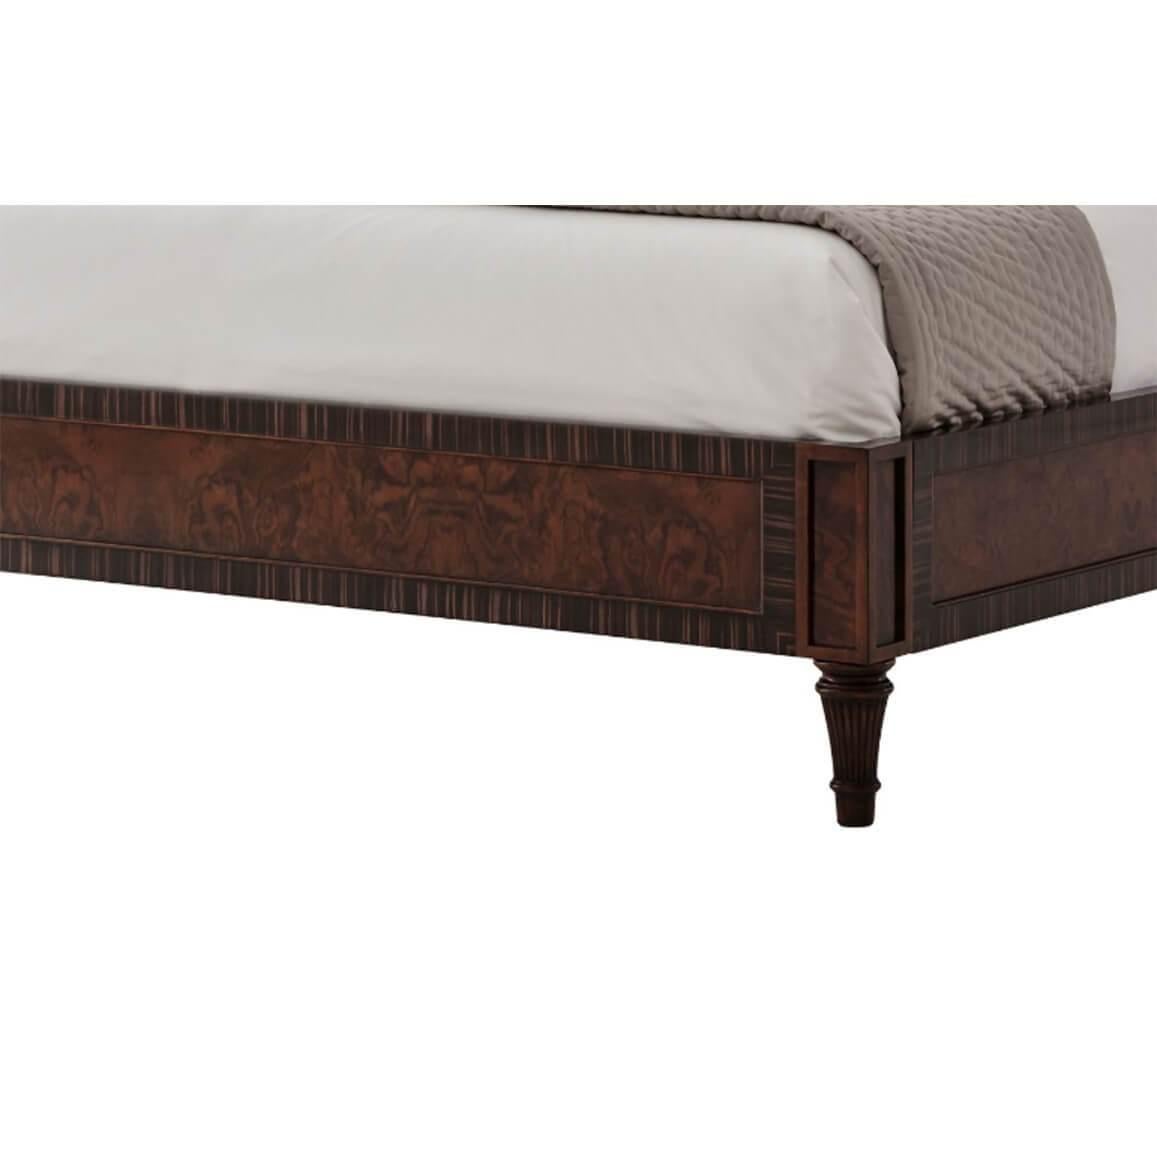 Contemporary Regency Style King Size Bed